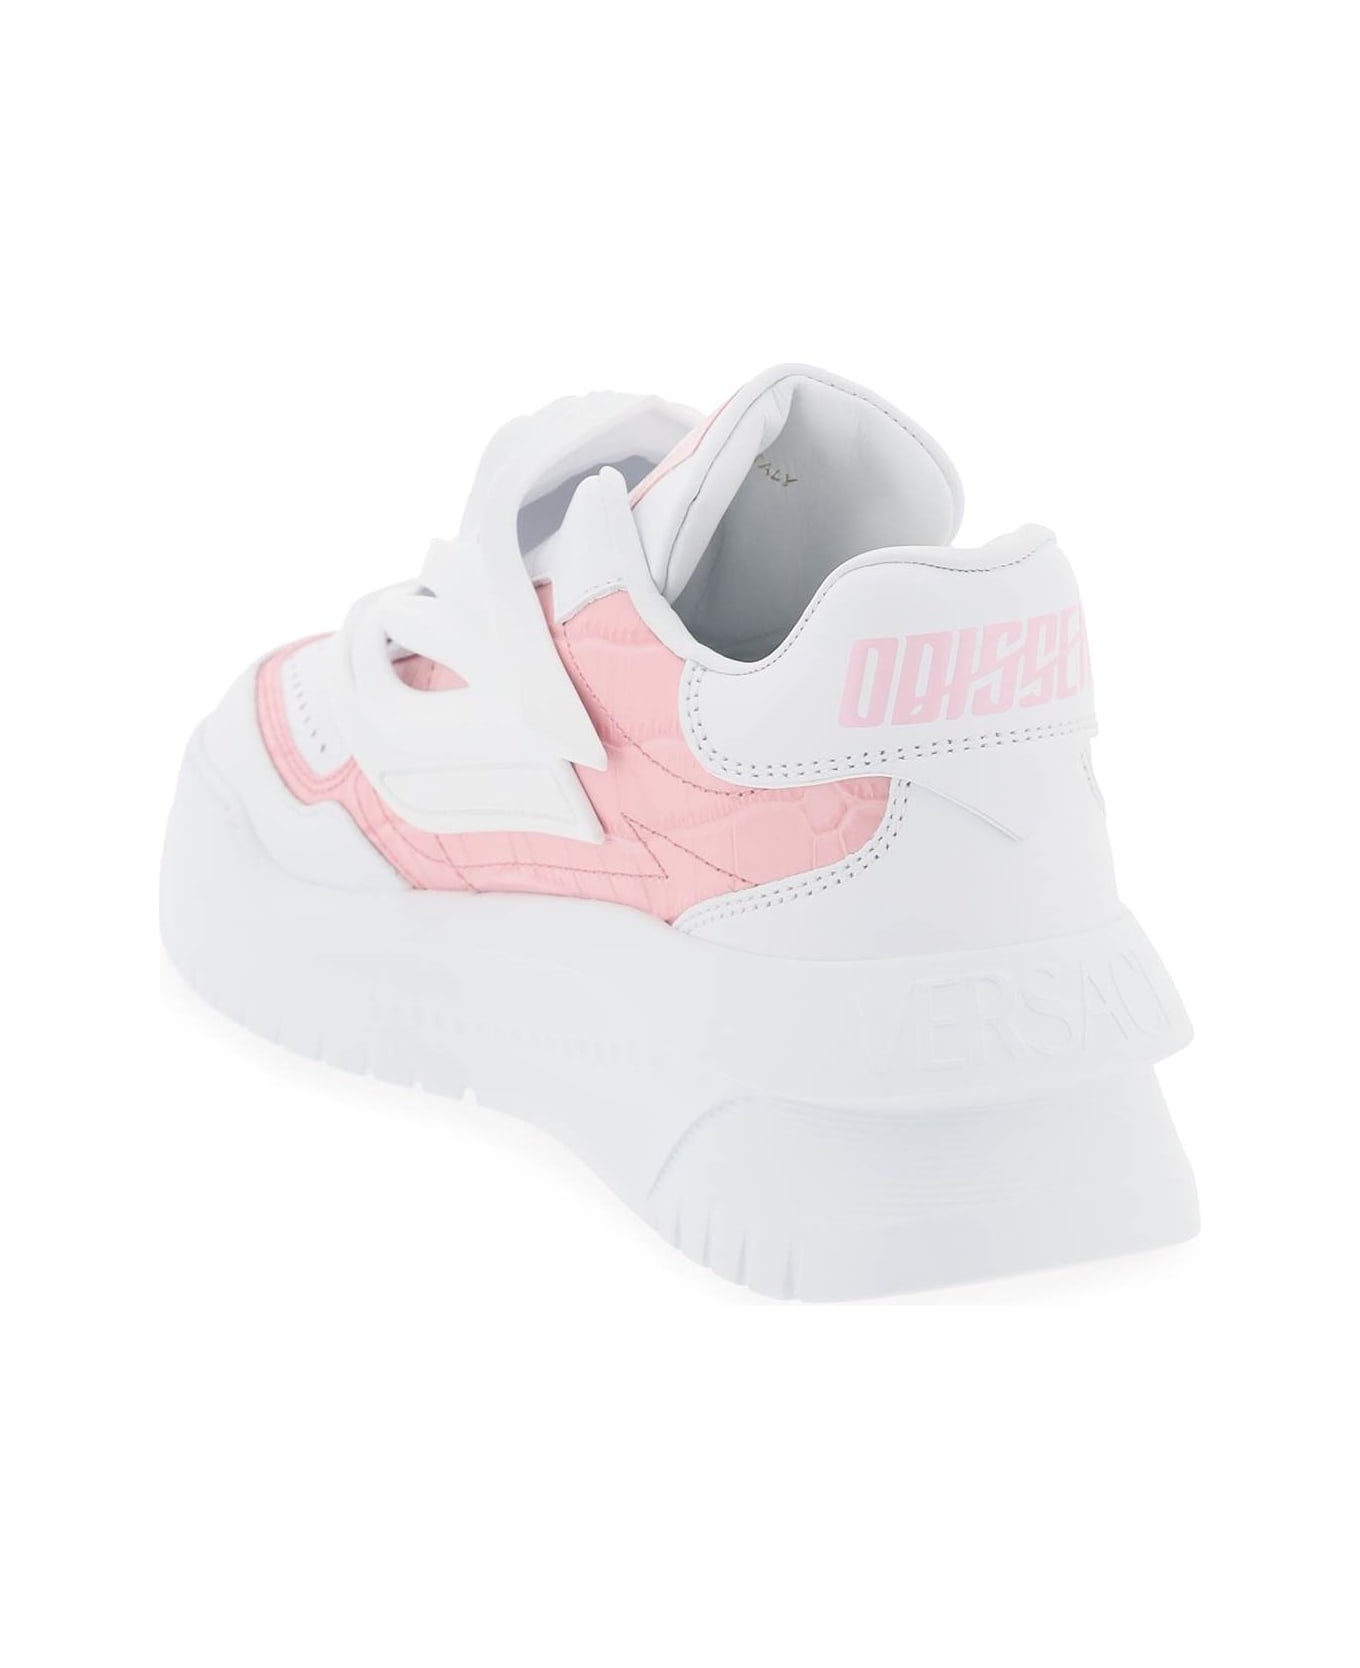 Versace Odissea Sneakers - WHITE ENGLISH ROSE (White)